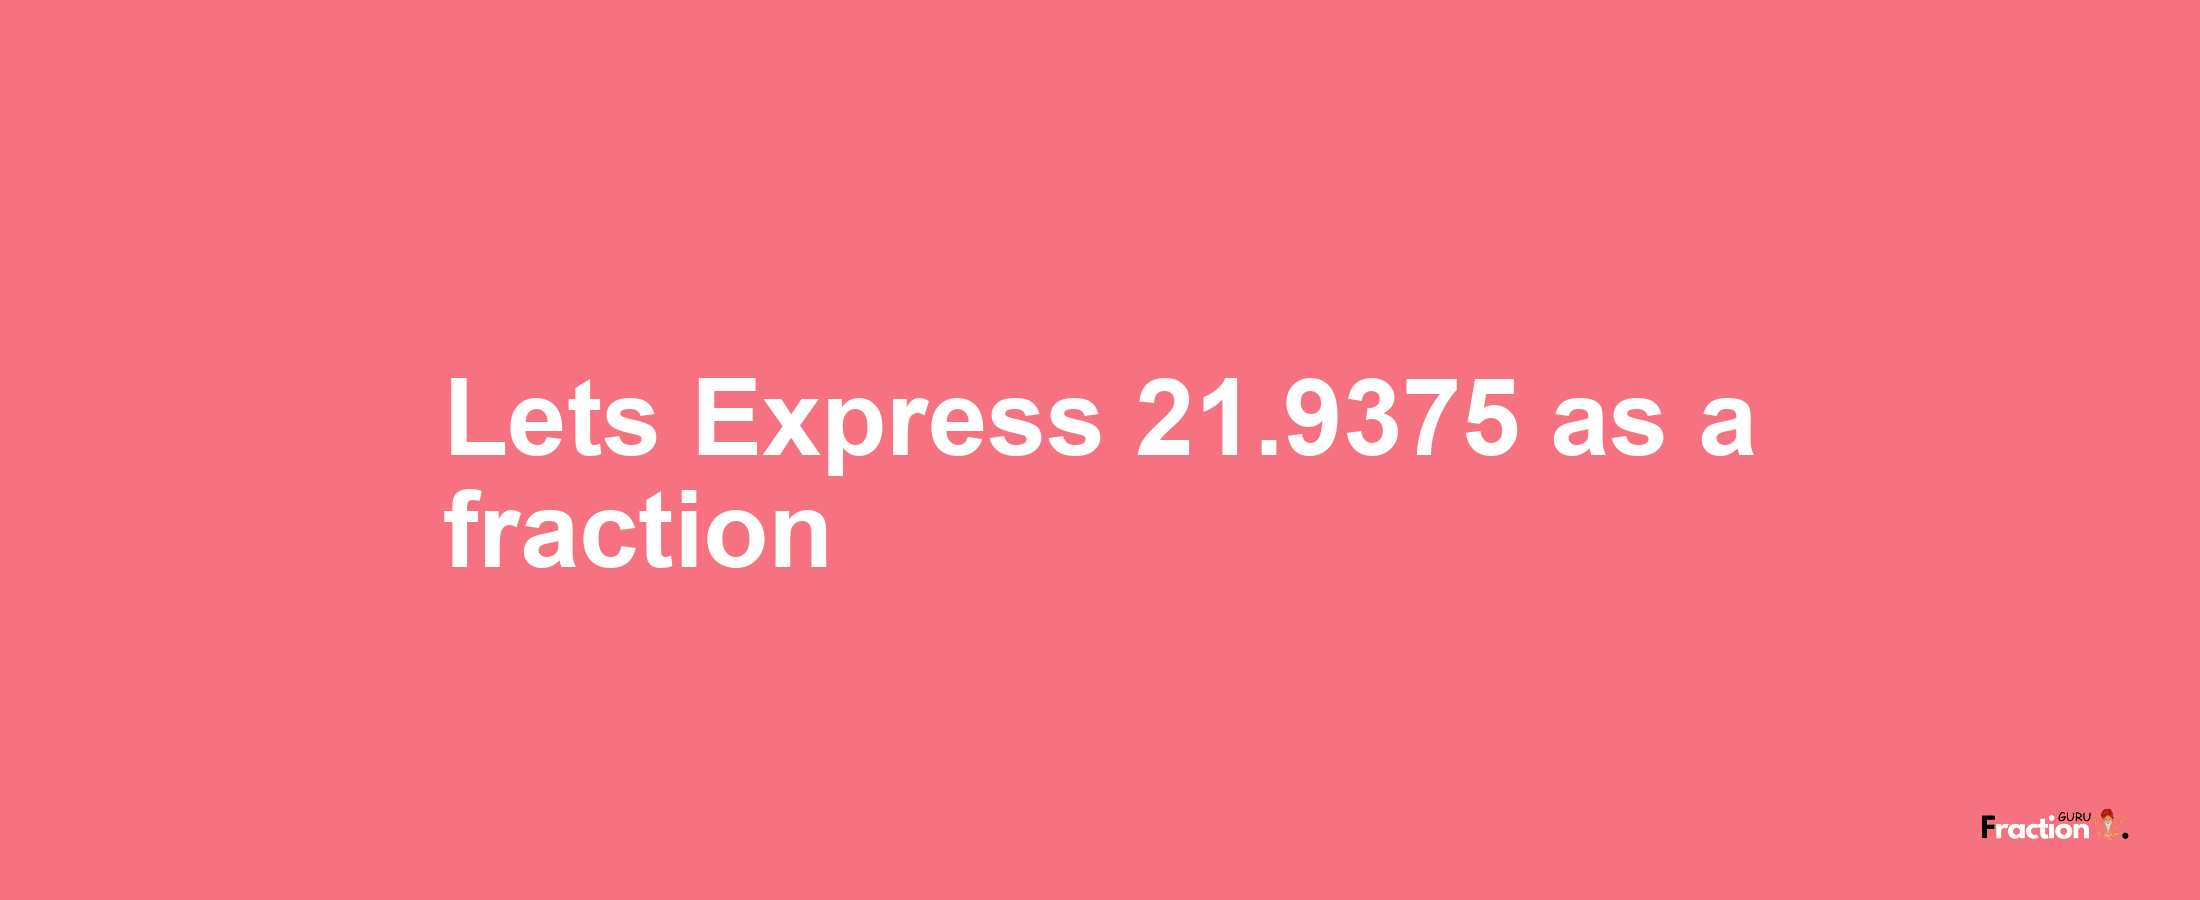 Lets Express 21.9375 as afraction